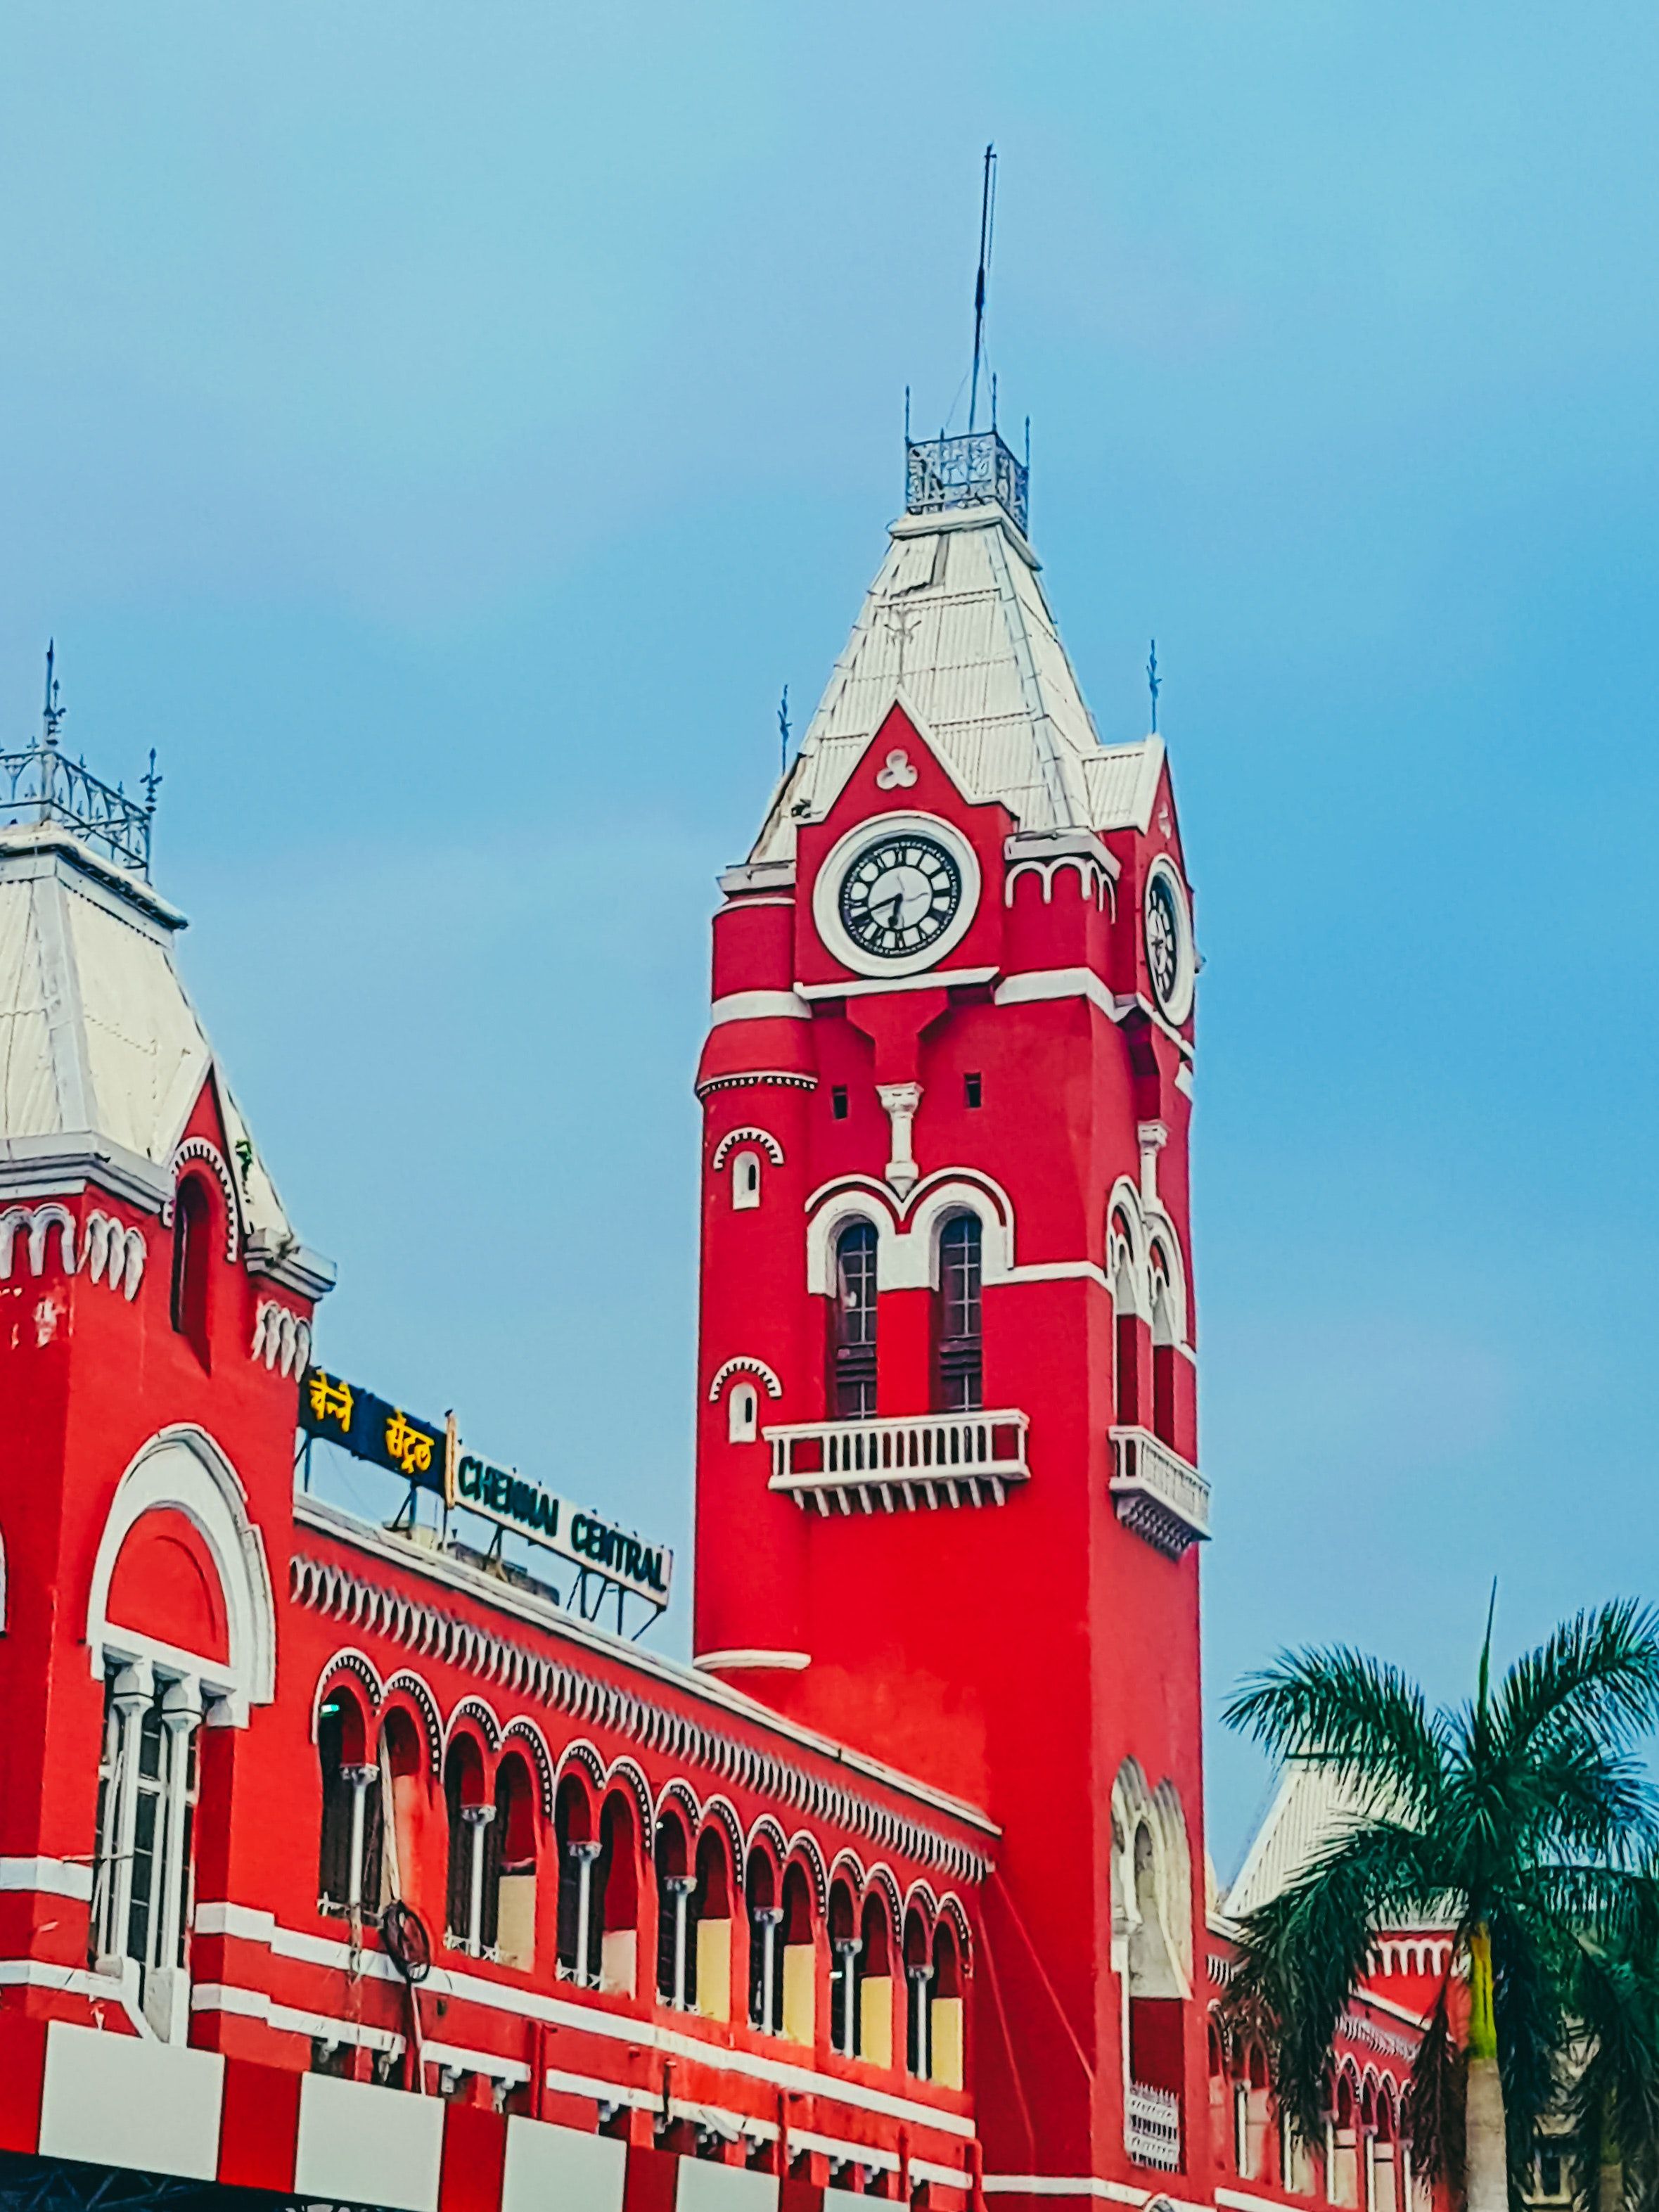 356 Chennai Central Railway Station Images Stock Photos  Vectors   Shutterstock